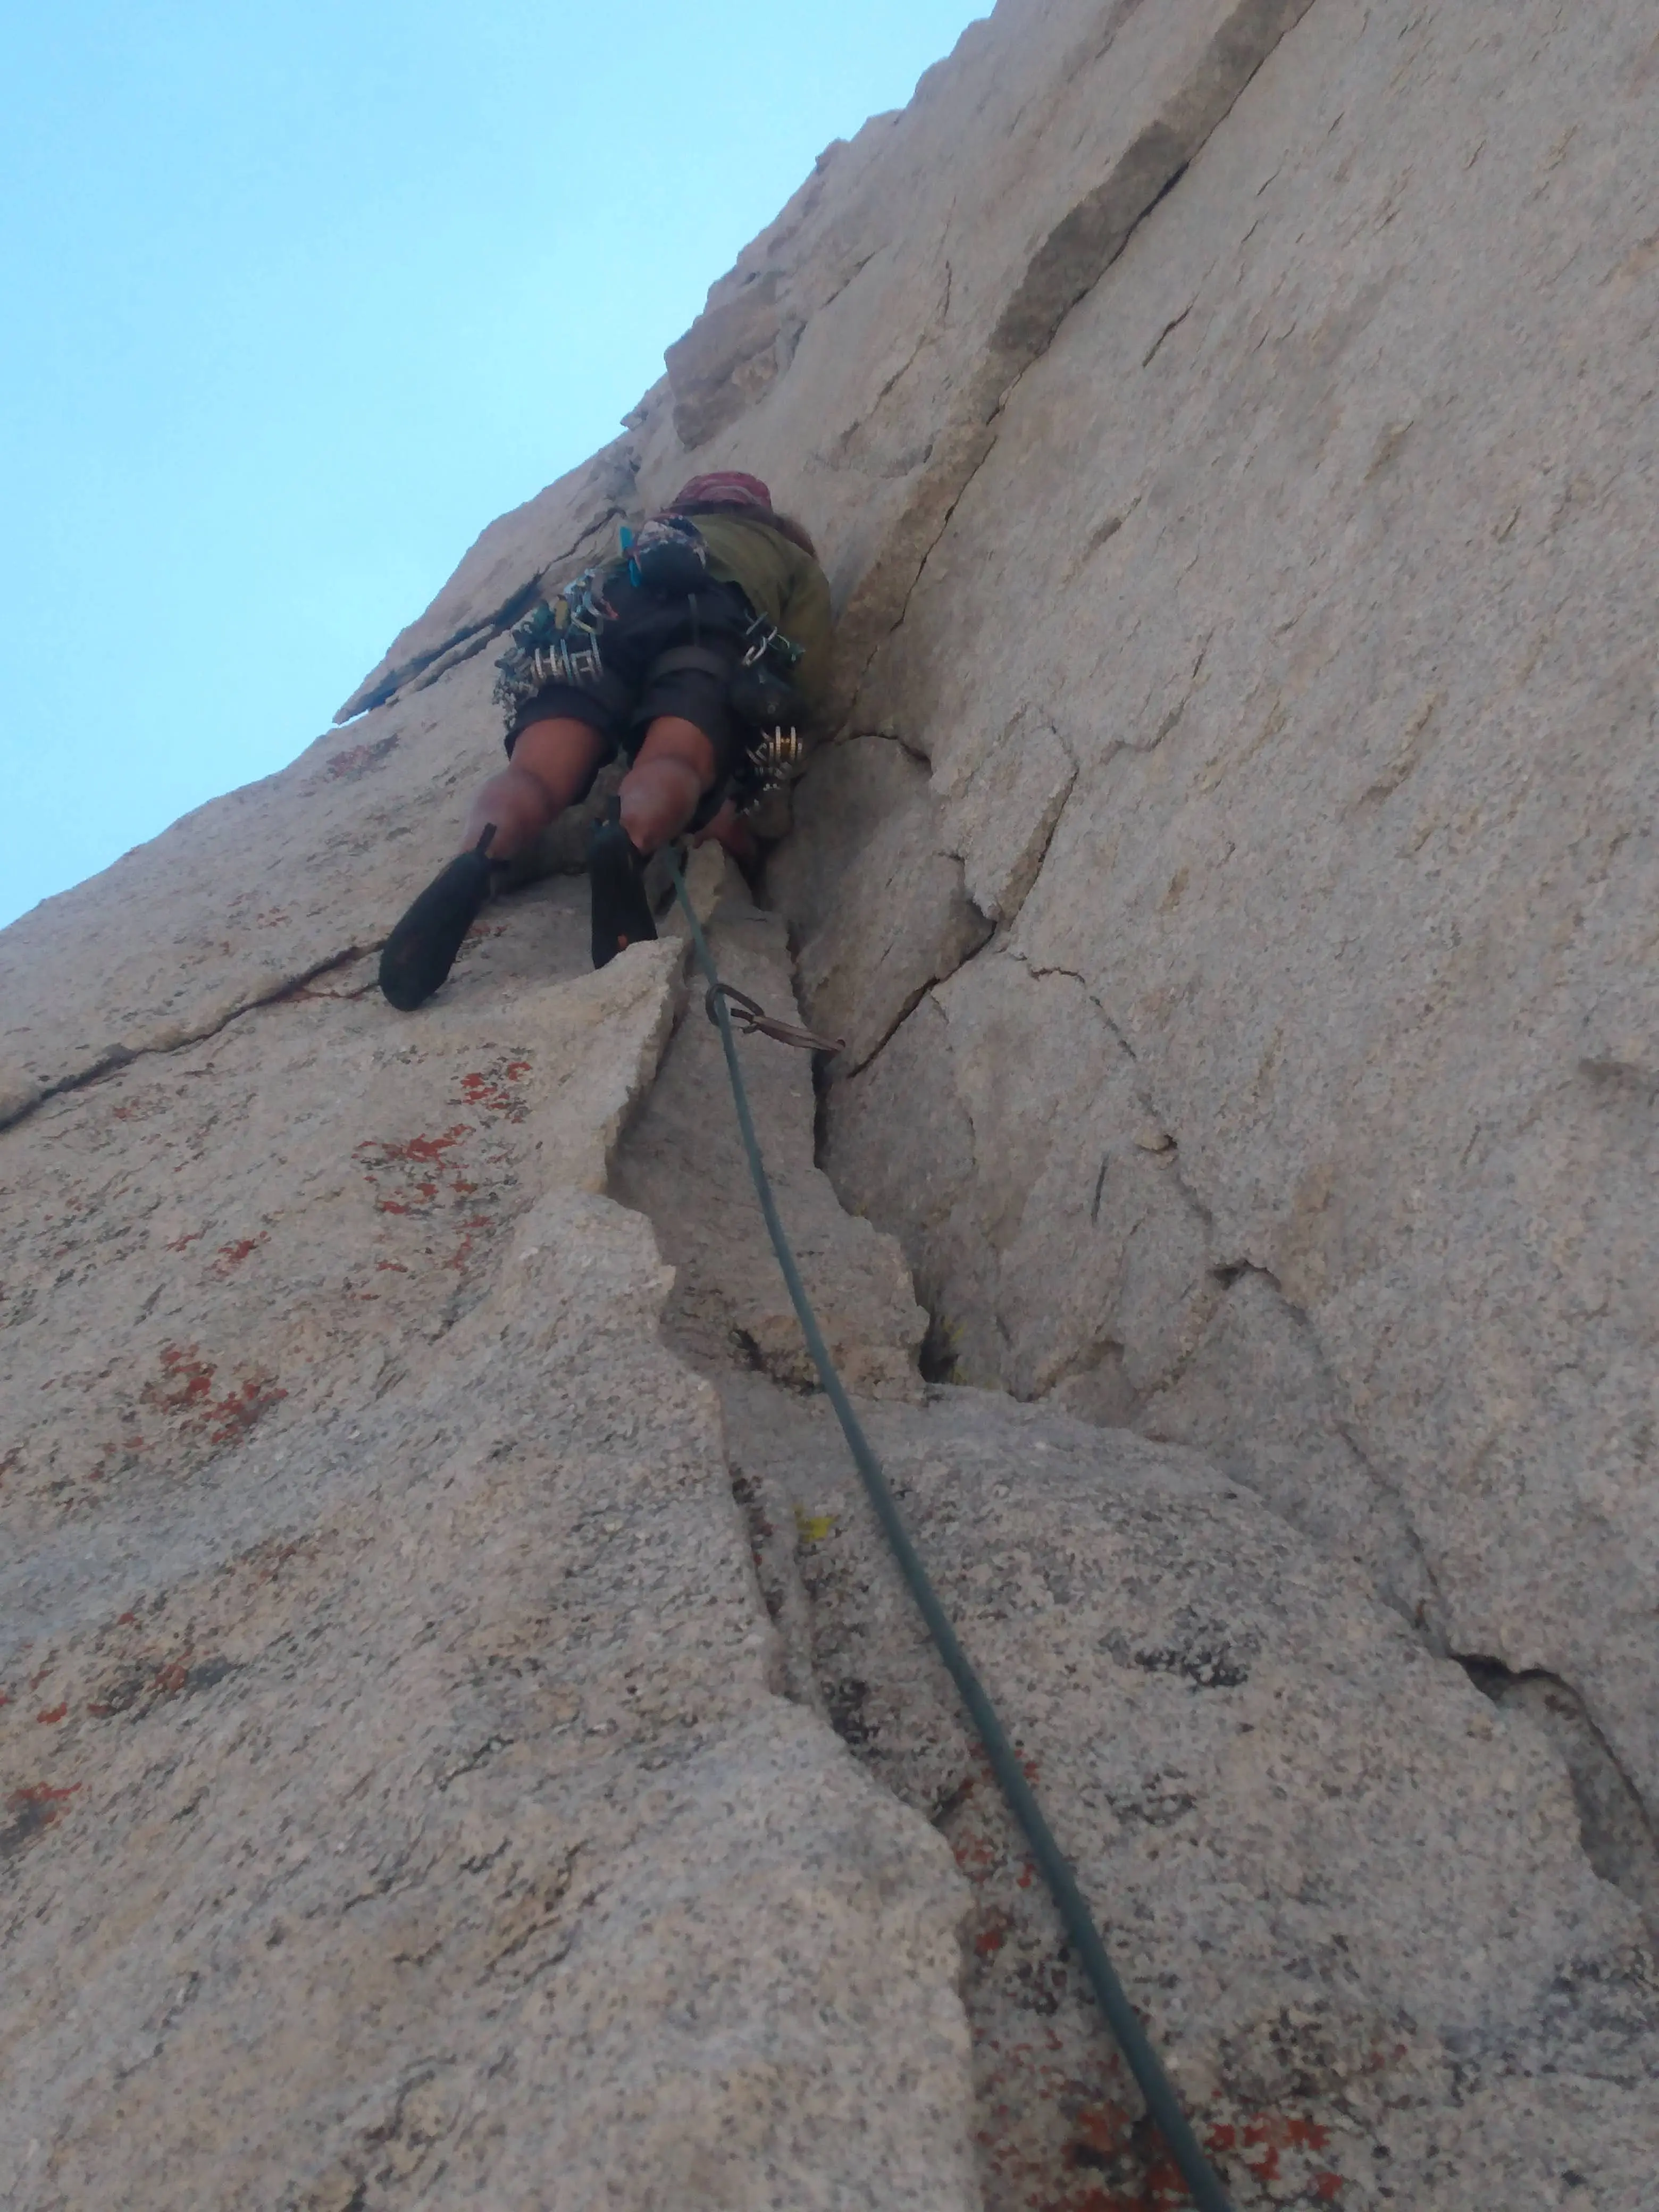 The Flying Buttress (5.11b)